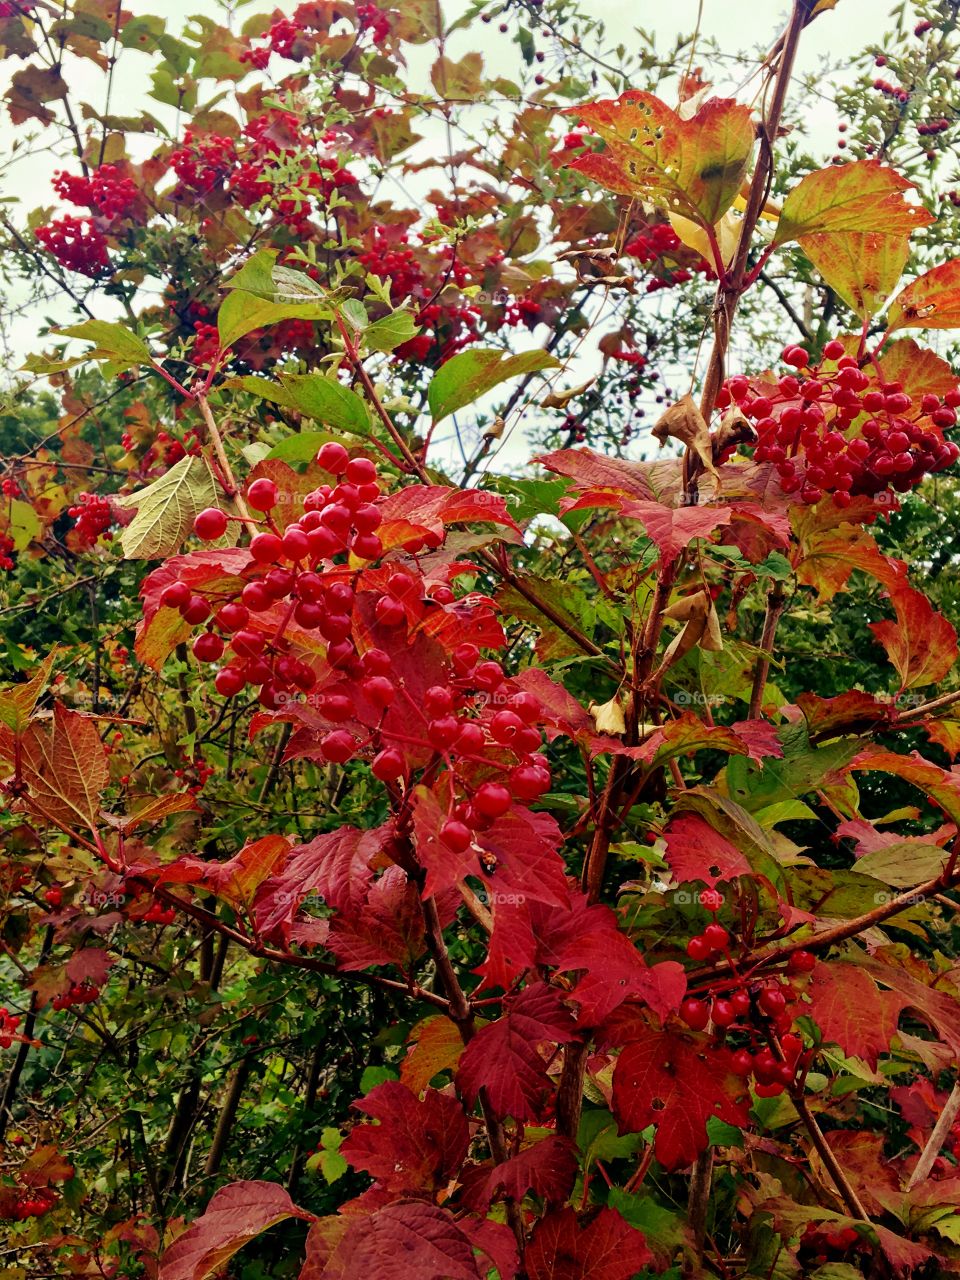 Red Autumn leaves and berries